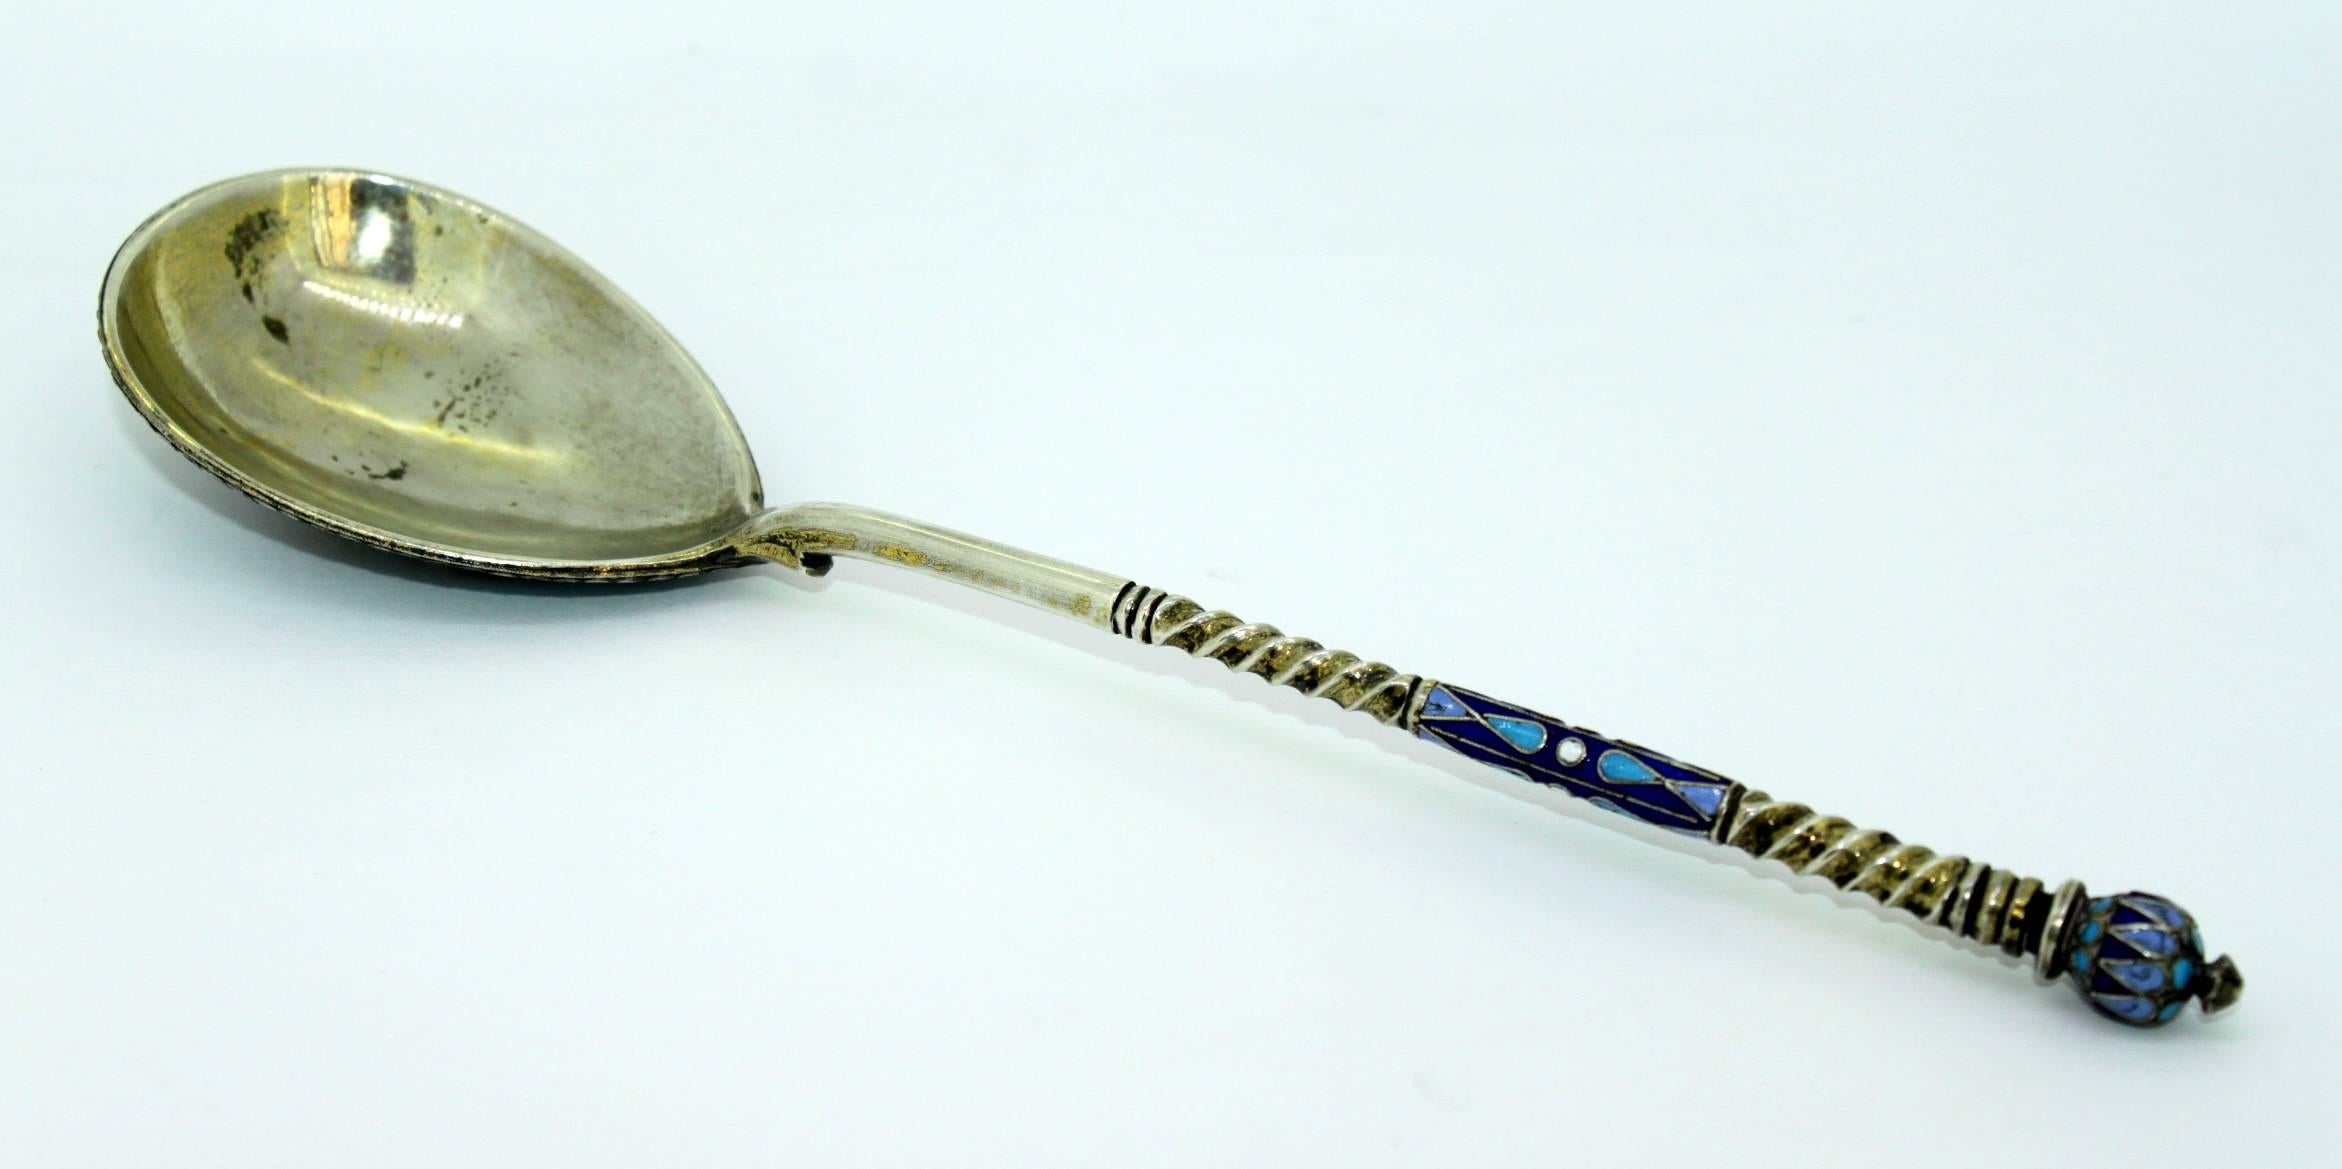 Early 20th Century Antique Russian Silver and Enamel Spoon, Moscow by Vasily Andreyev, circa 1900